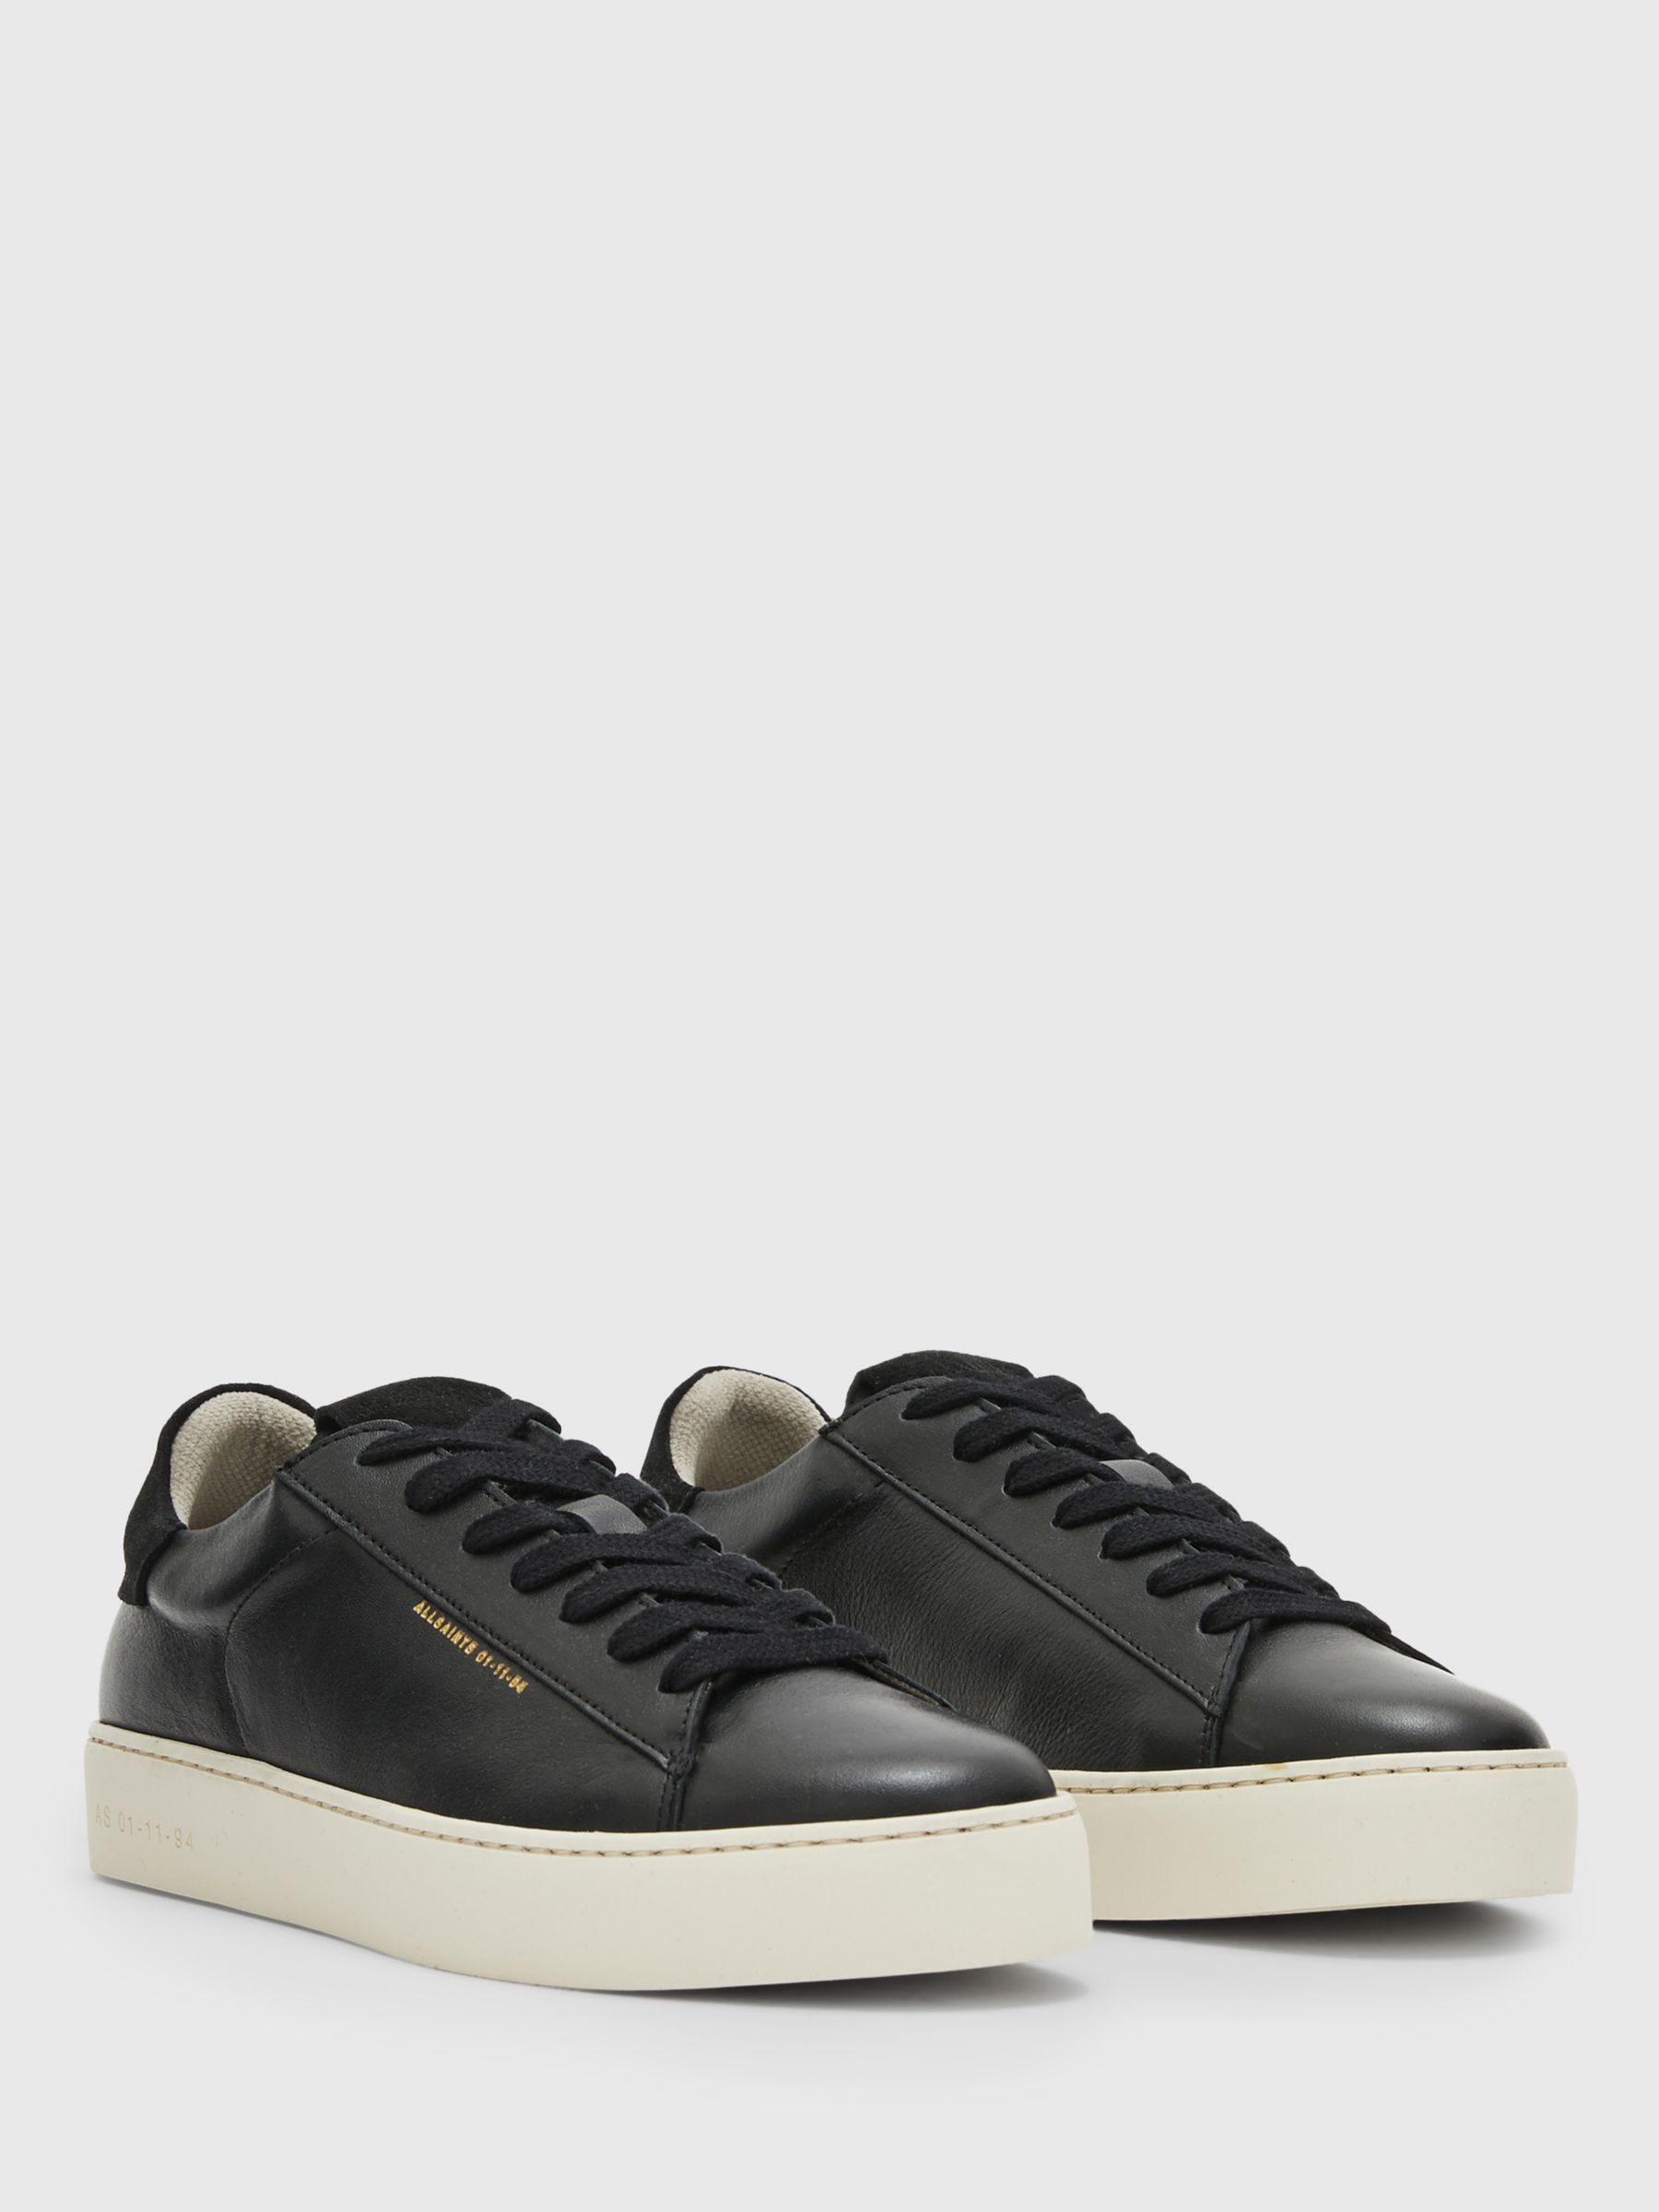 AllSaints Shana Leather Lace Up Trainers, Black at John Lewis & Partners